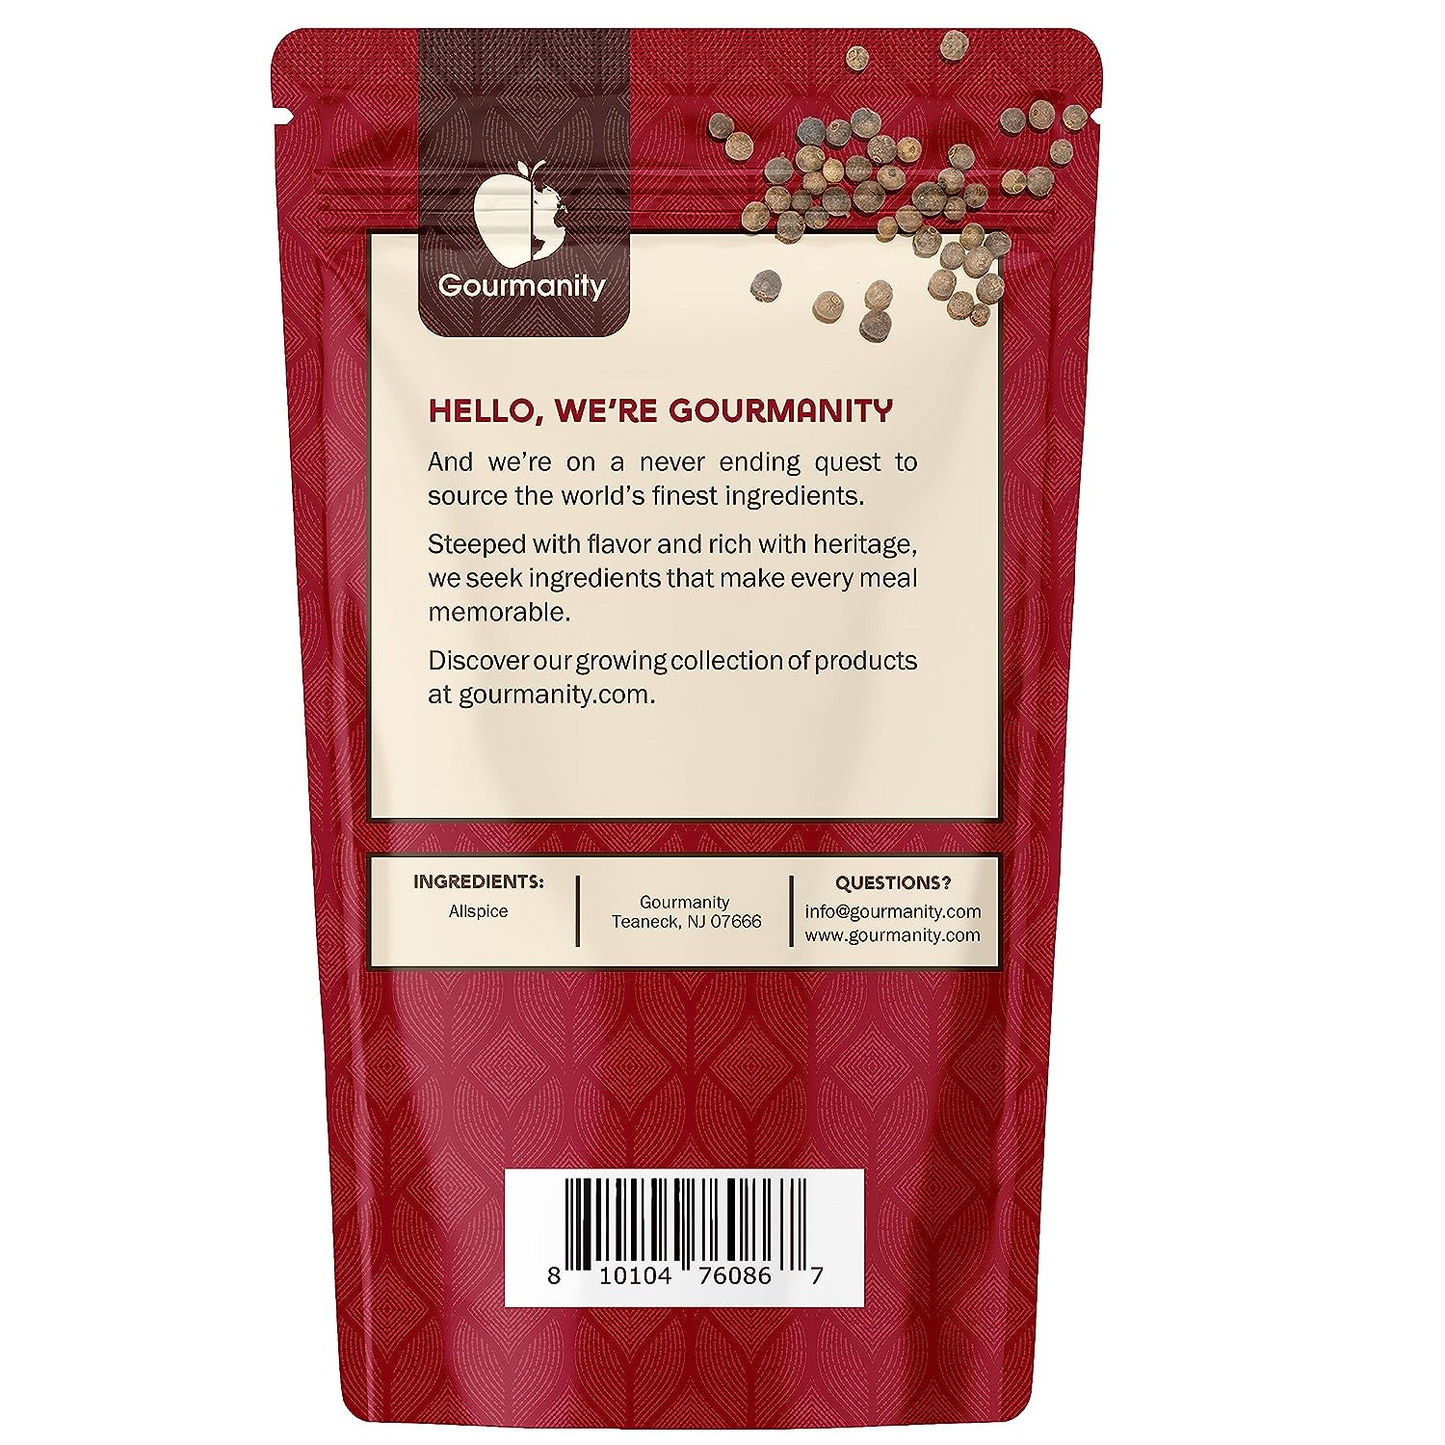 Gourmanity Whole Allspice Berries 1lb - Gourmanity